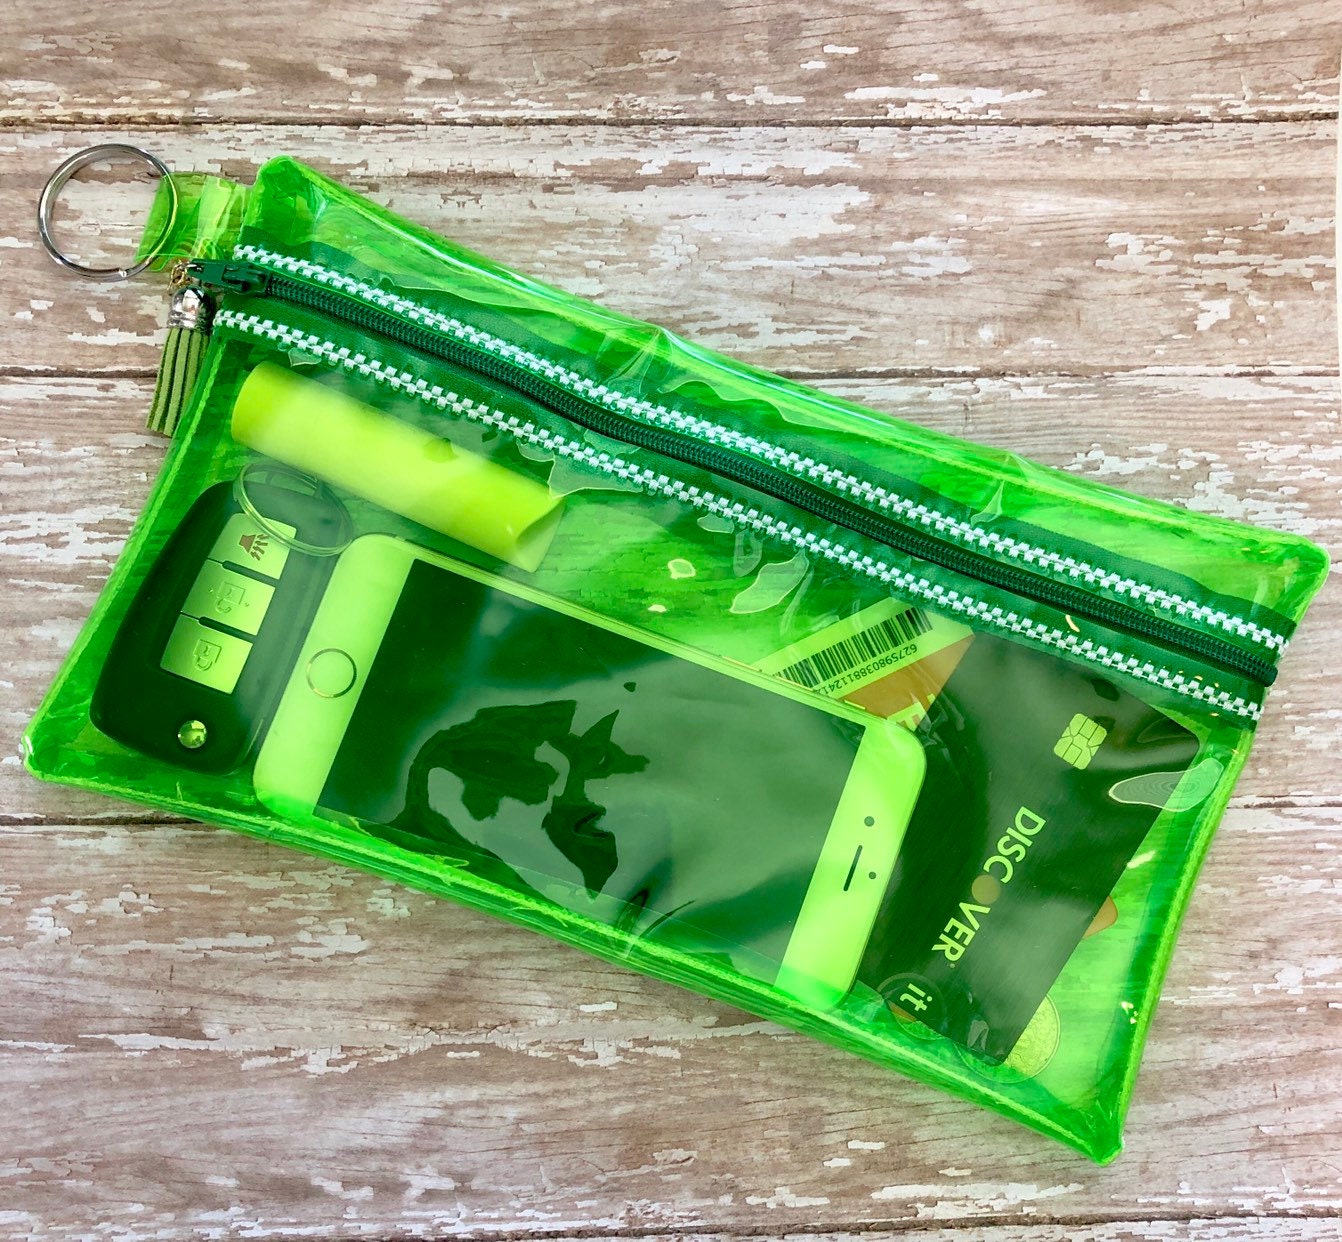 Game Day Clear Purse! – There She Goes